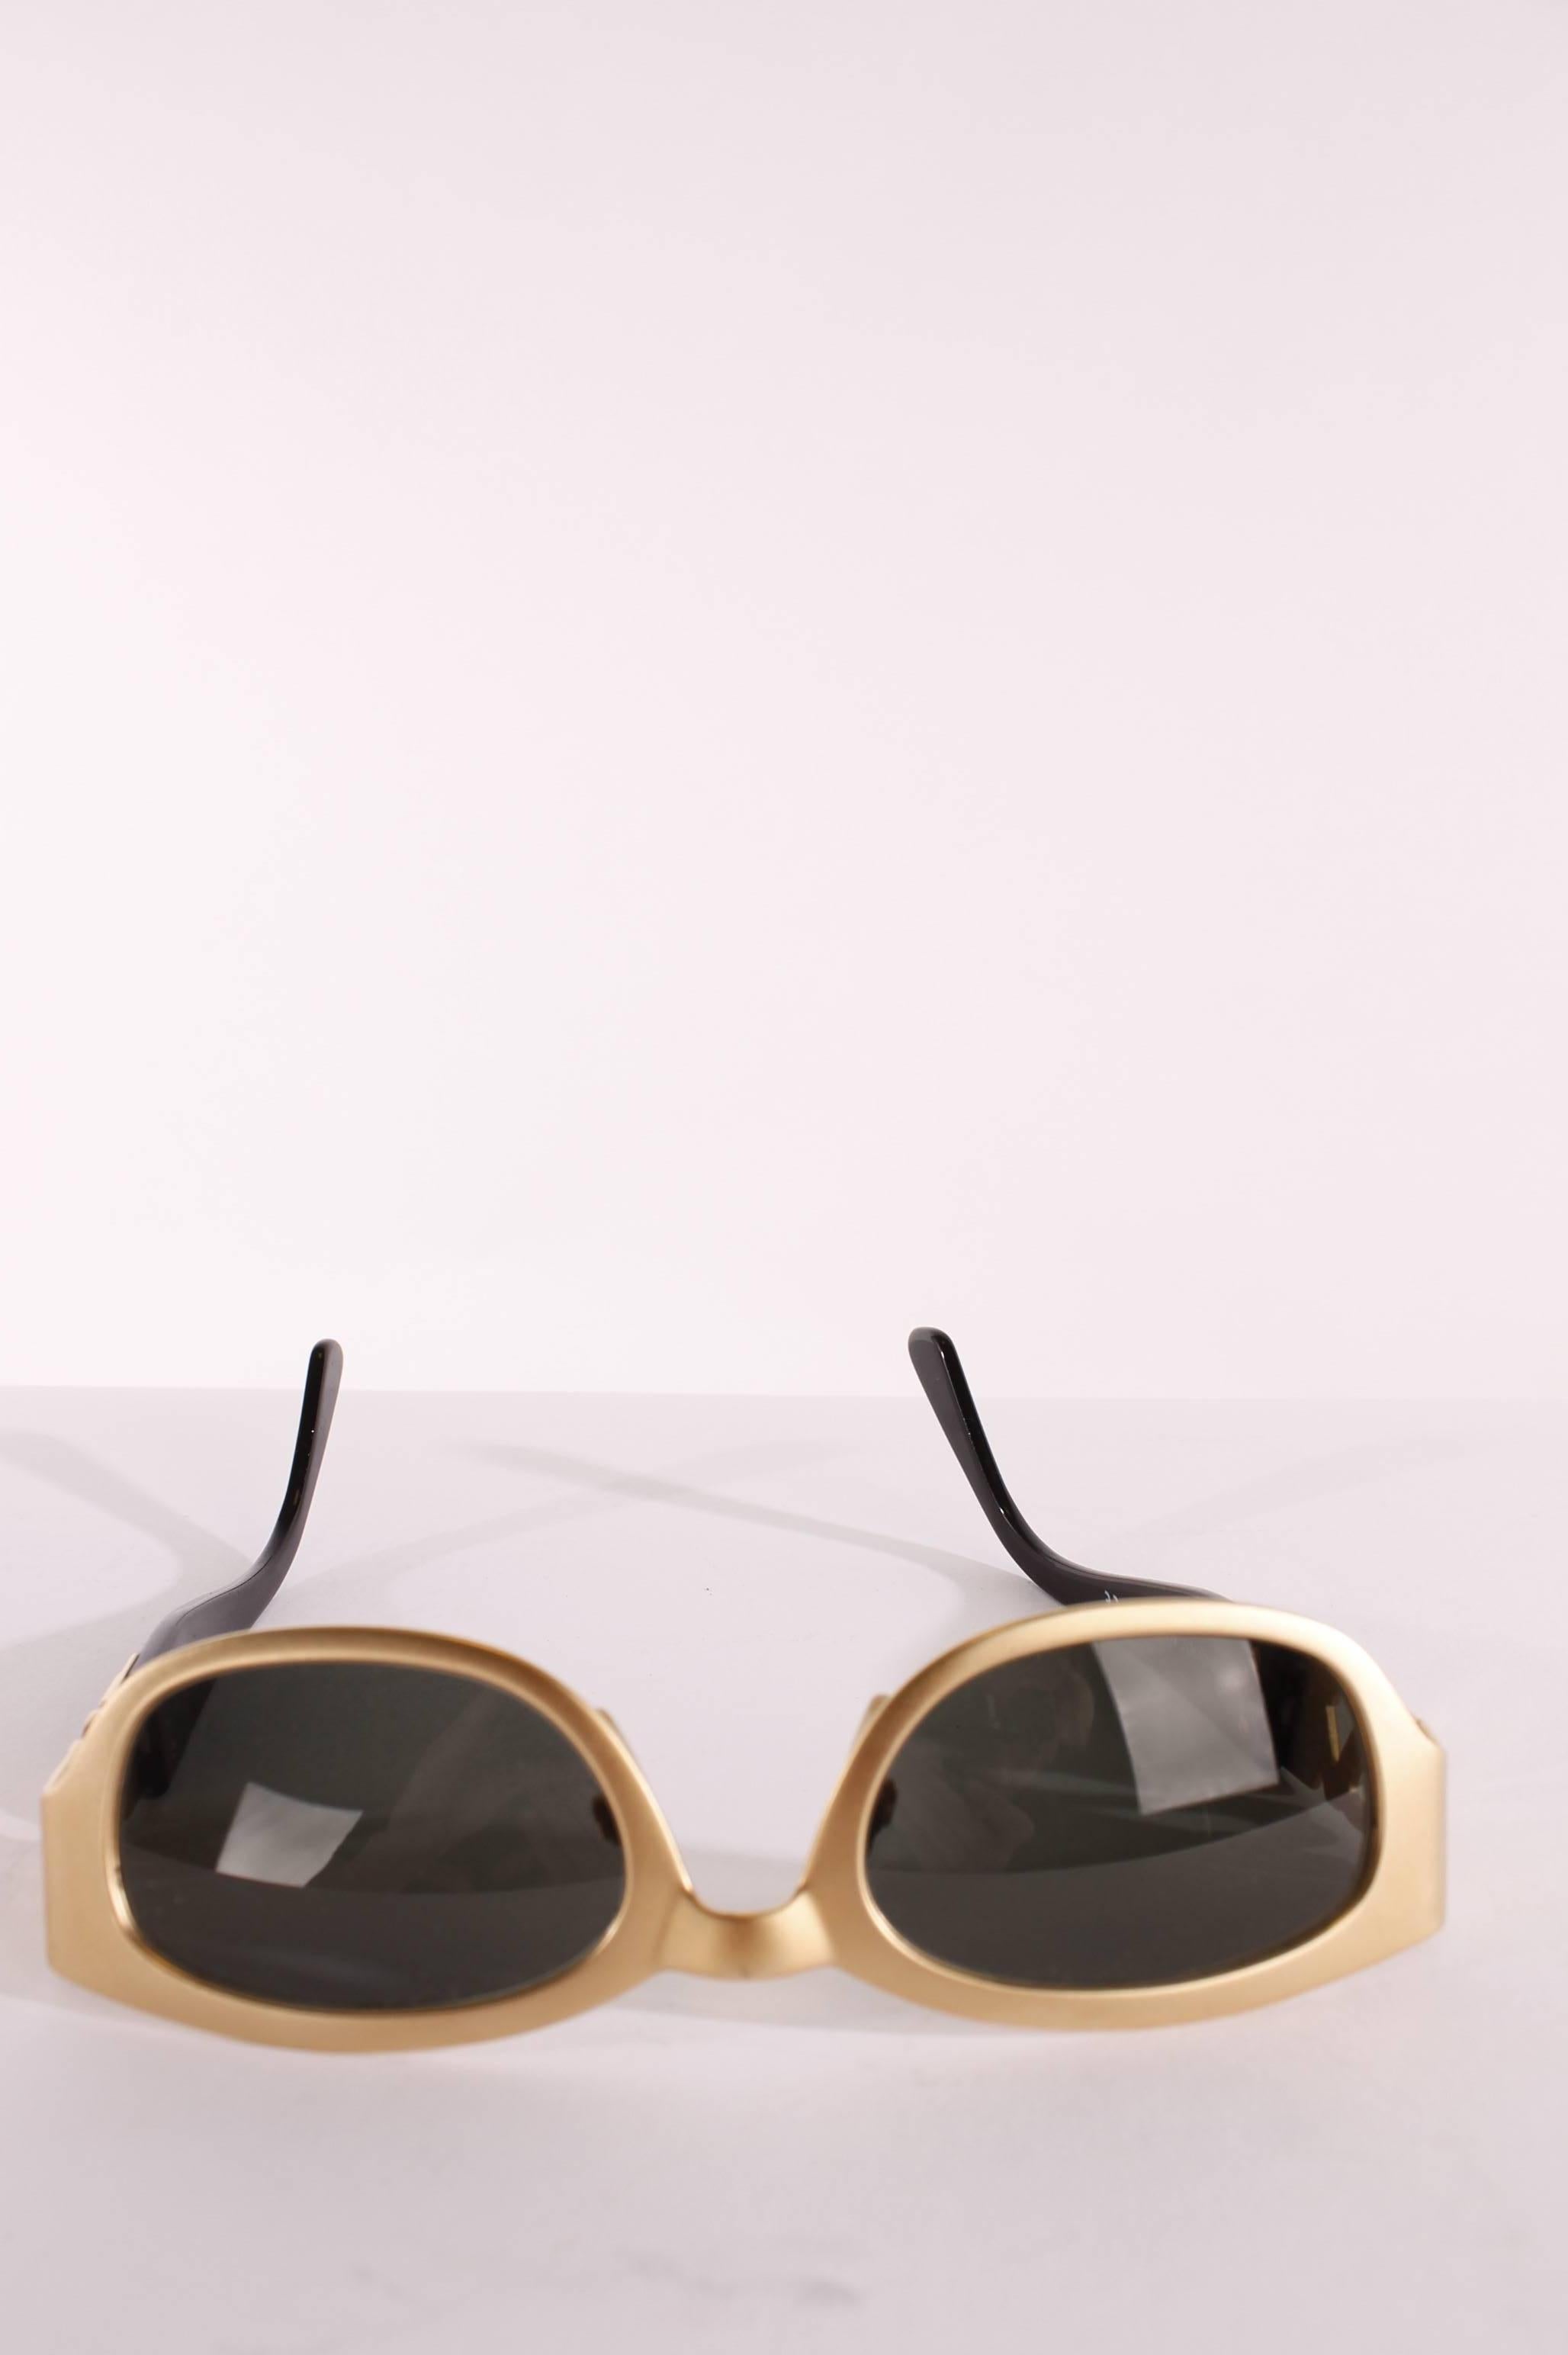 A vintage pair of sunglasses made by Luxottica for Yves Saint Laurent.

The frame is made of golden very light weight metal and square shaped, lenses are grey. Glasses are like new, unfortunately the box is slightly damaged. 
Beautiful